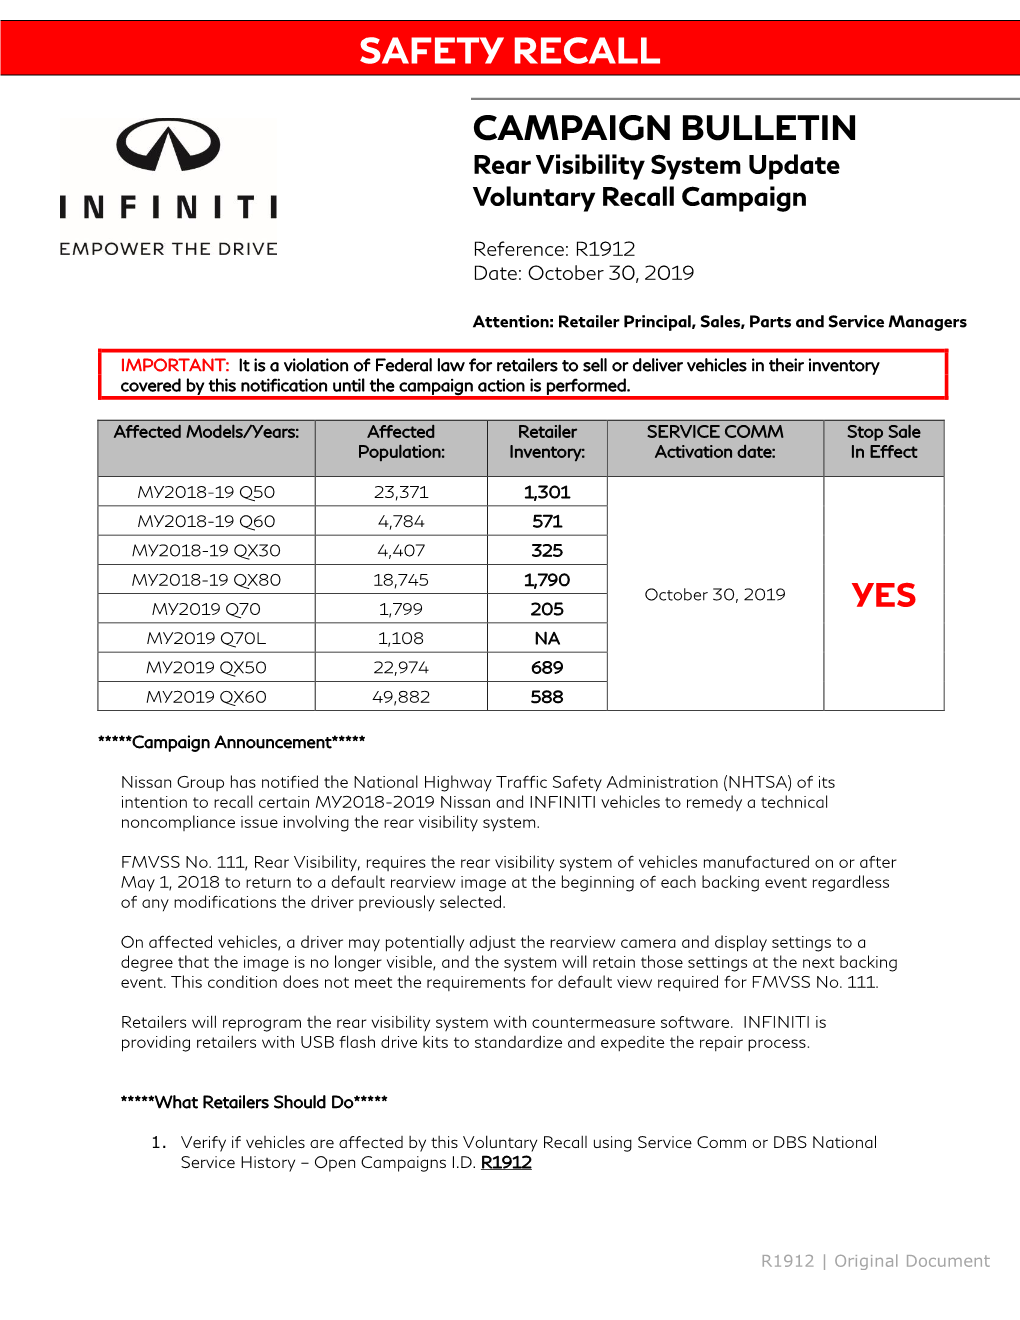 Rear Visibility System Update Voluntary Recall Campaign